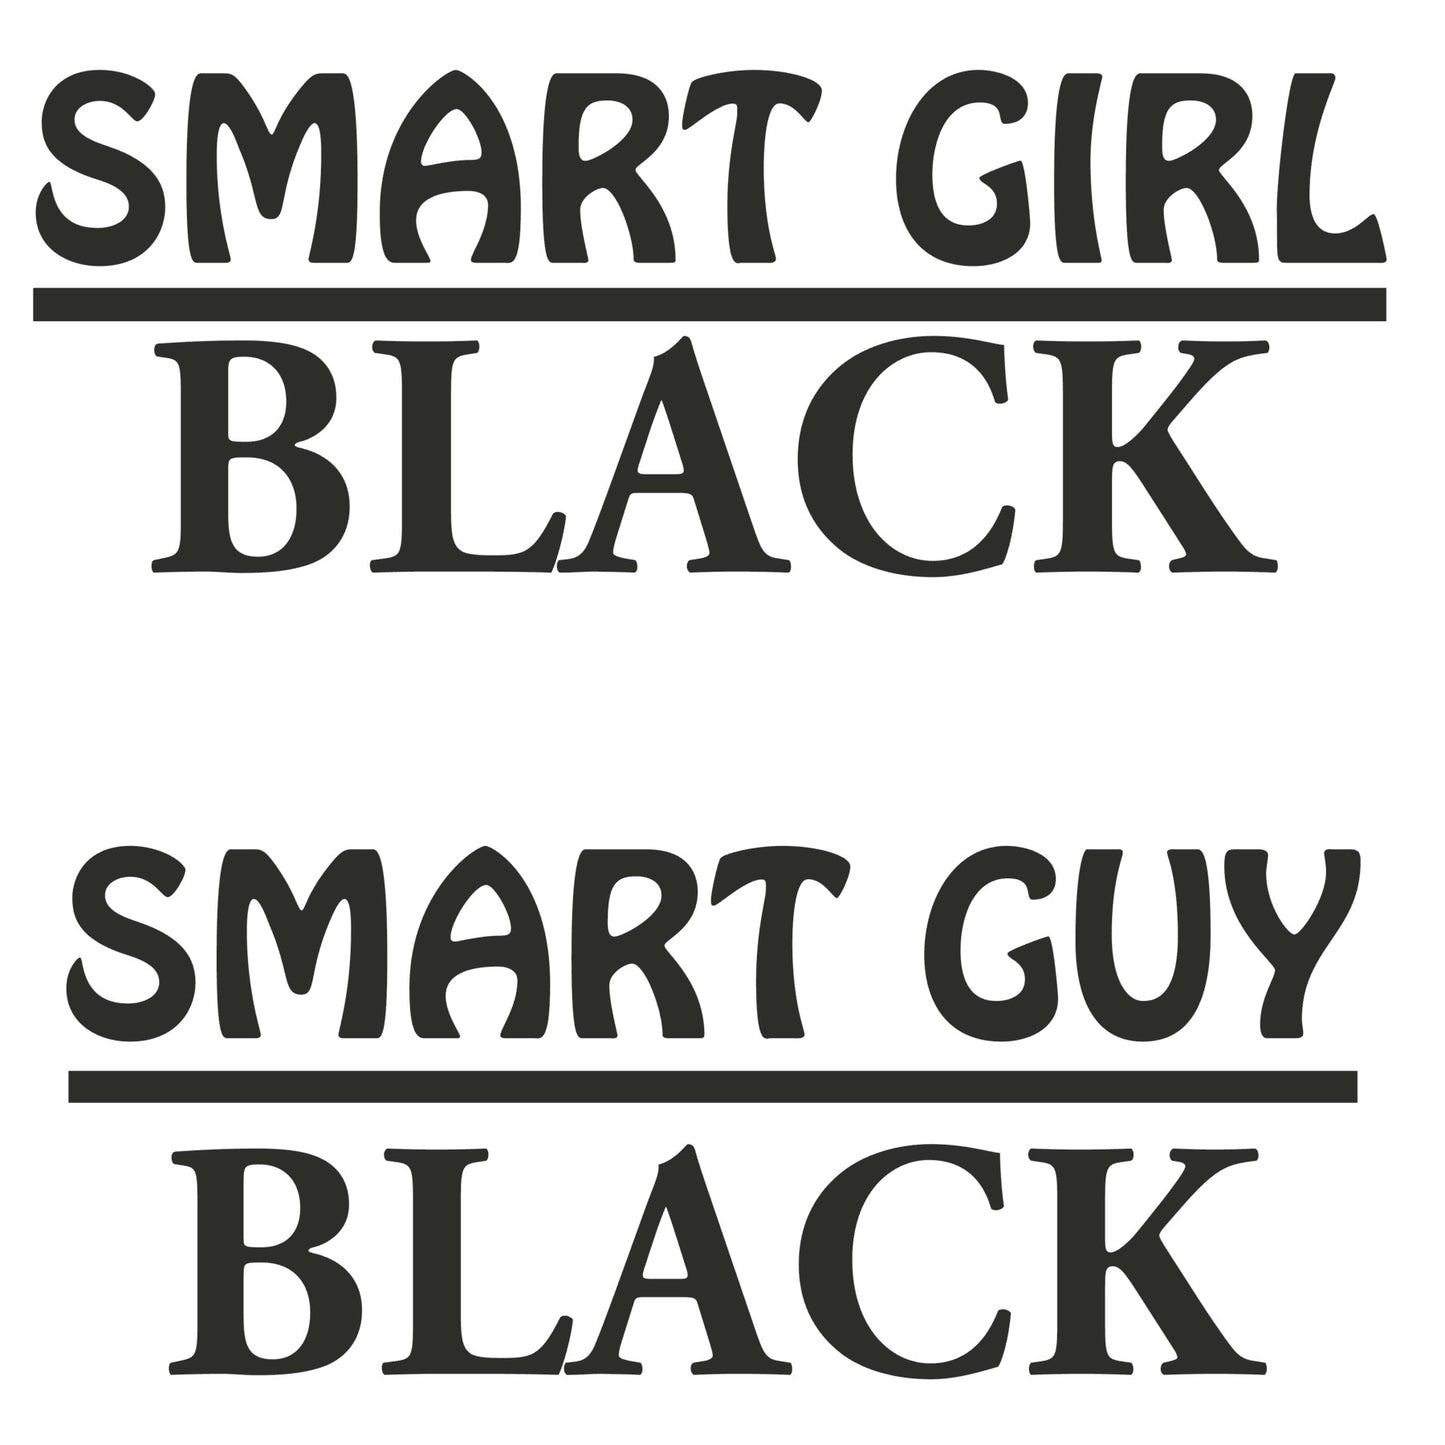 SMART GIRL - (Customize shirt type & title in comment section)